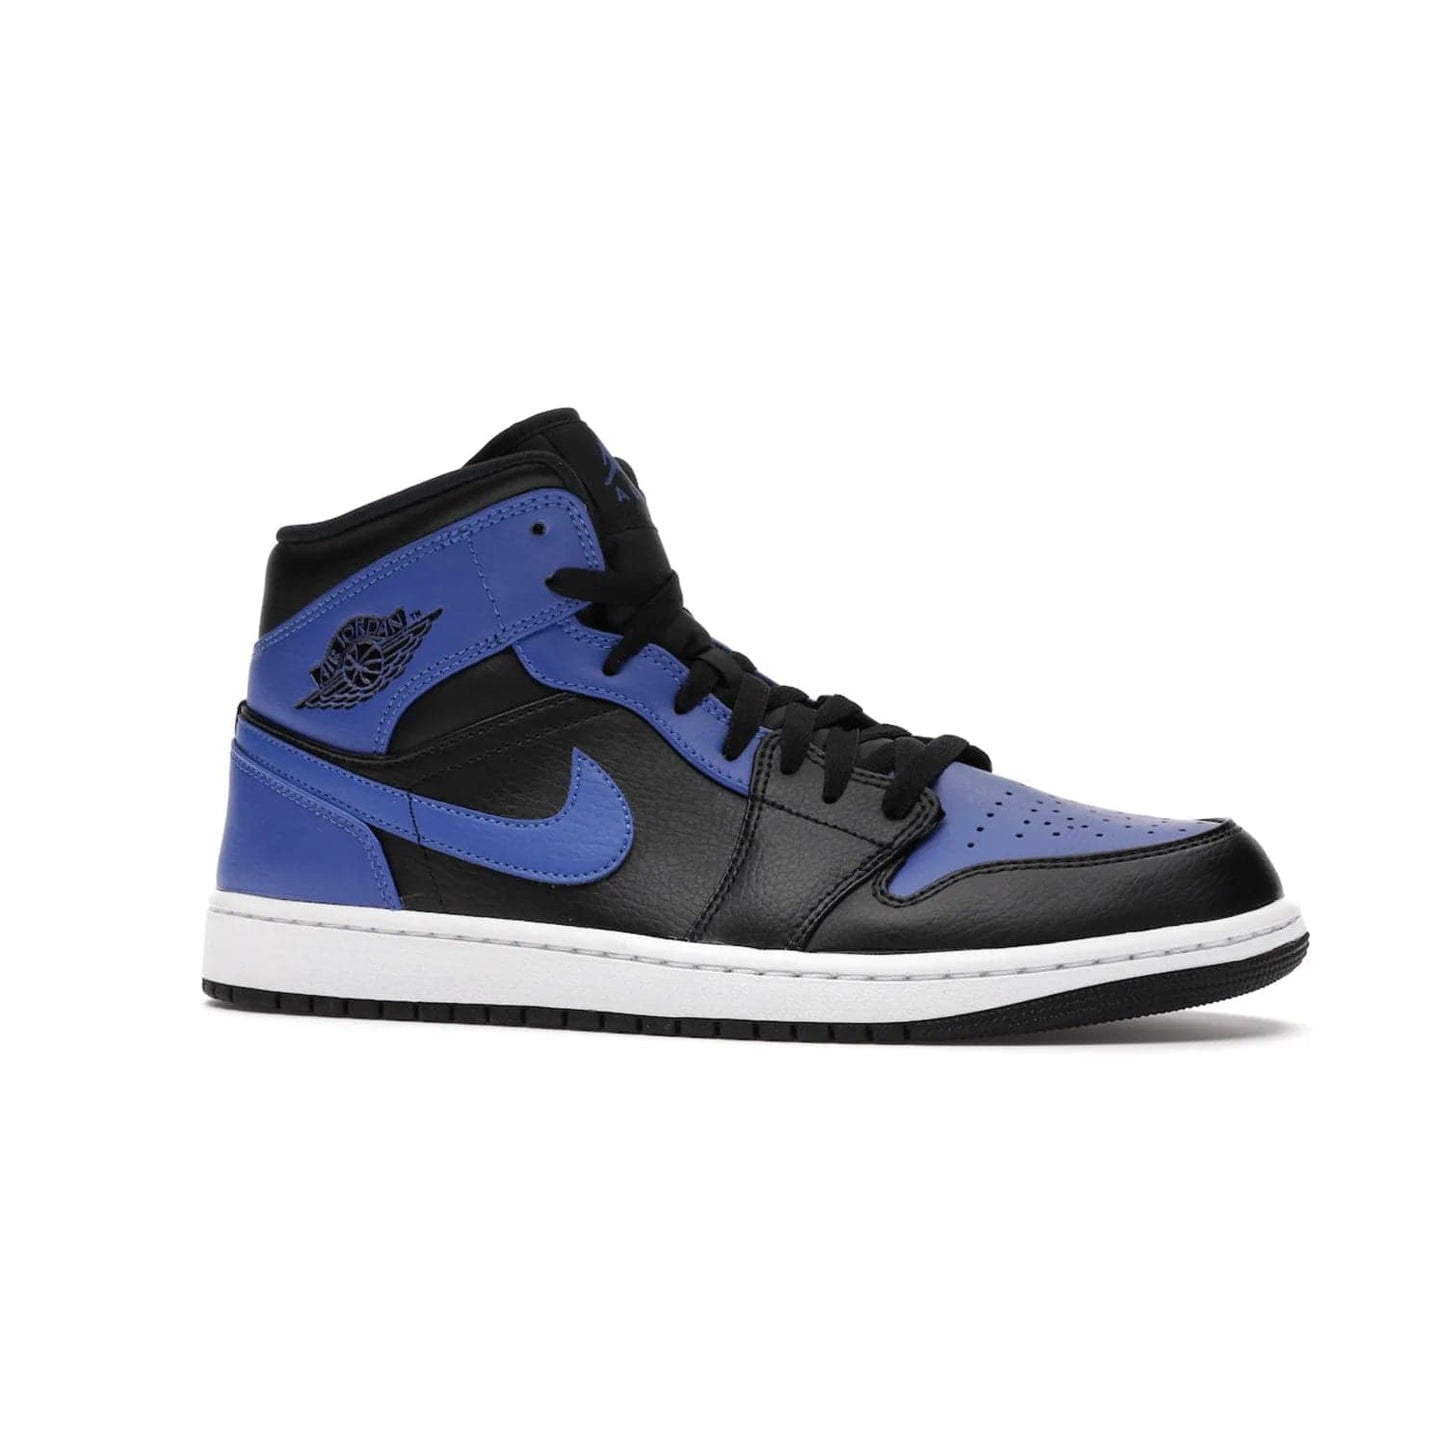 Jordan 1 Mid Hyper Royal Tumbled Leather - Image 3 - Only at www.BallersClubKickz.com - Iconic colorway of the Air Jordan 1 Mid Black Royal Tumbled Leather. Features a black tumbled leather upper, royal blue leather overlays, white midsole & black rubber outsole. Released December 2020. Adds premium style to any collection.